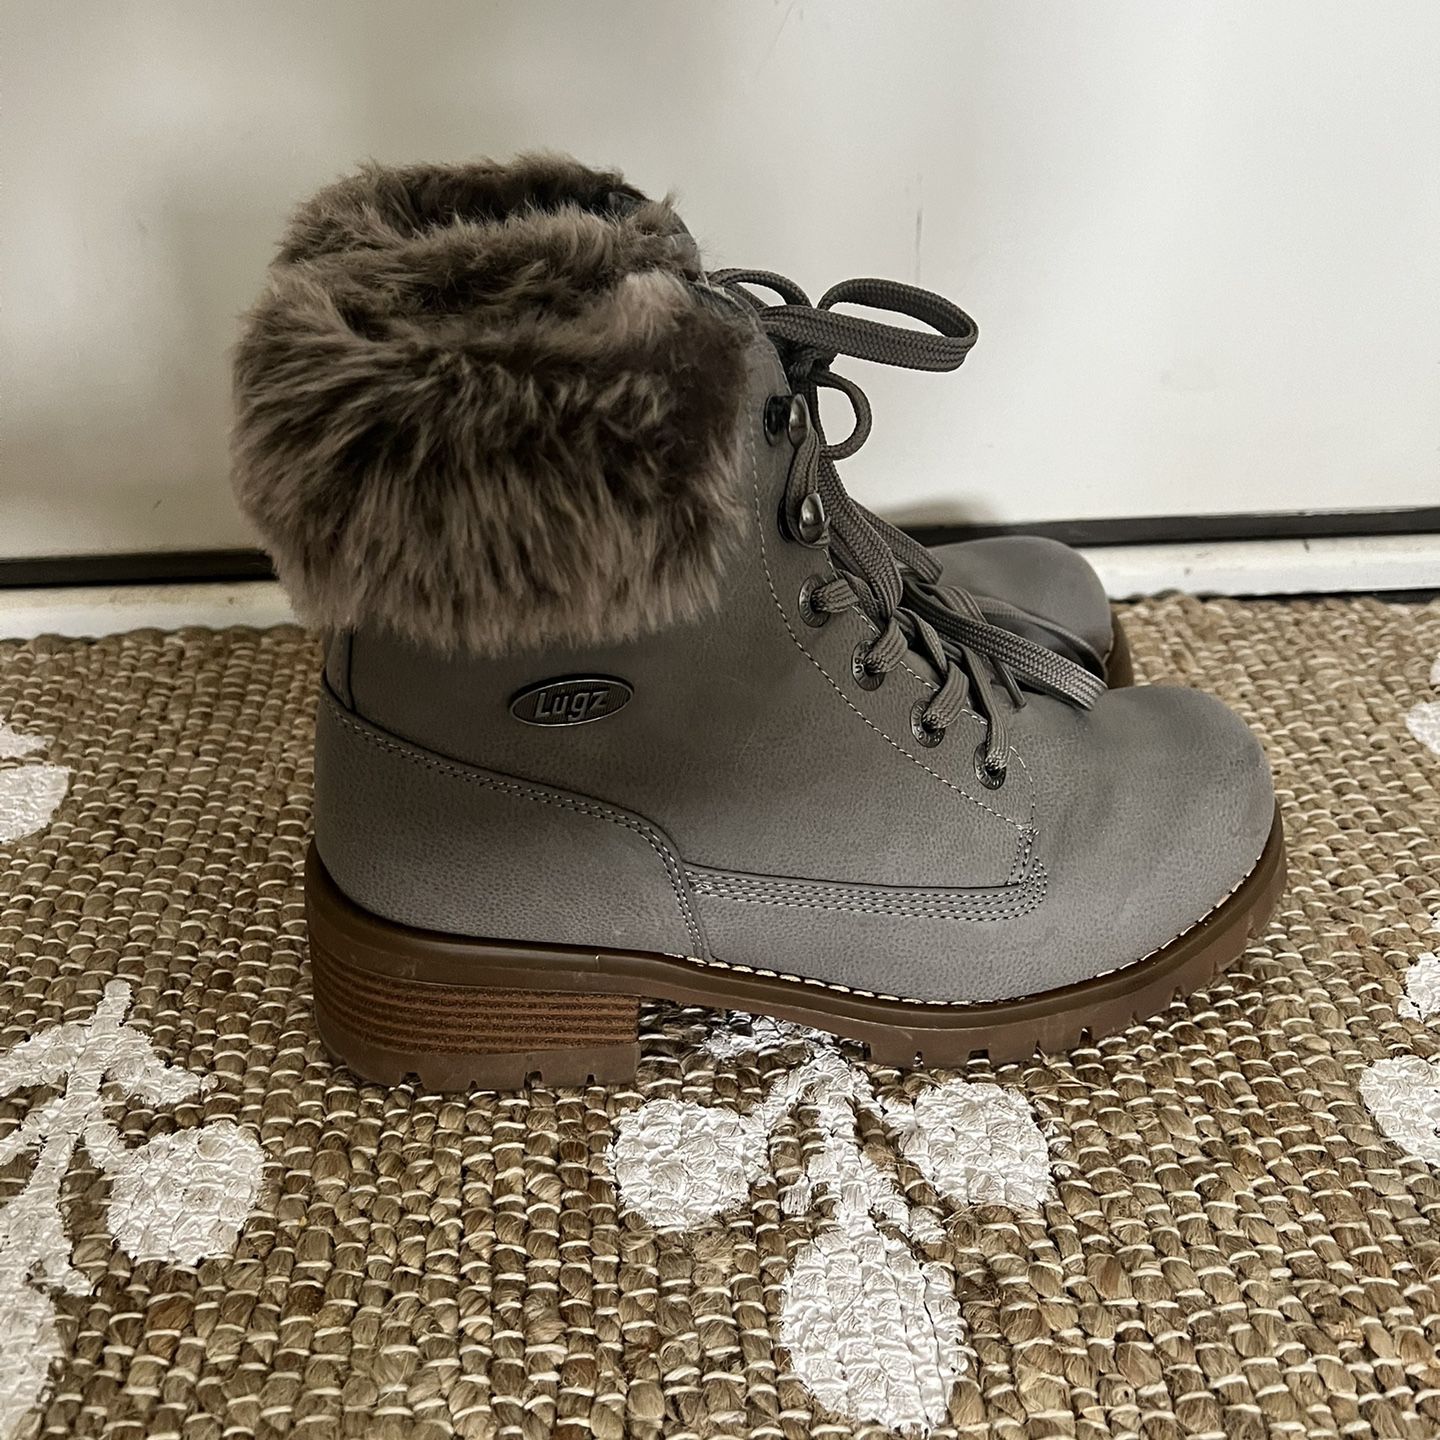 Gray Lugz Boots With Fur